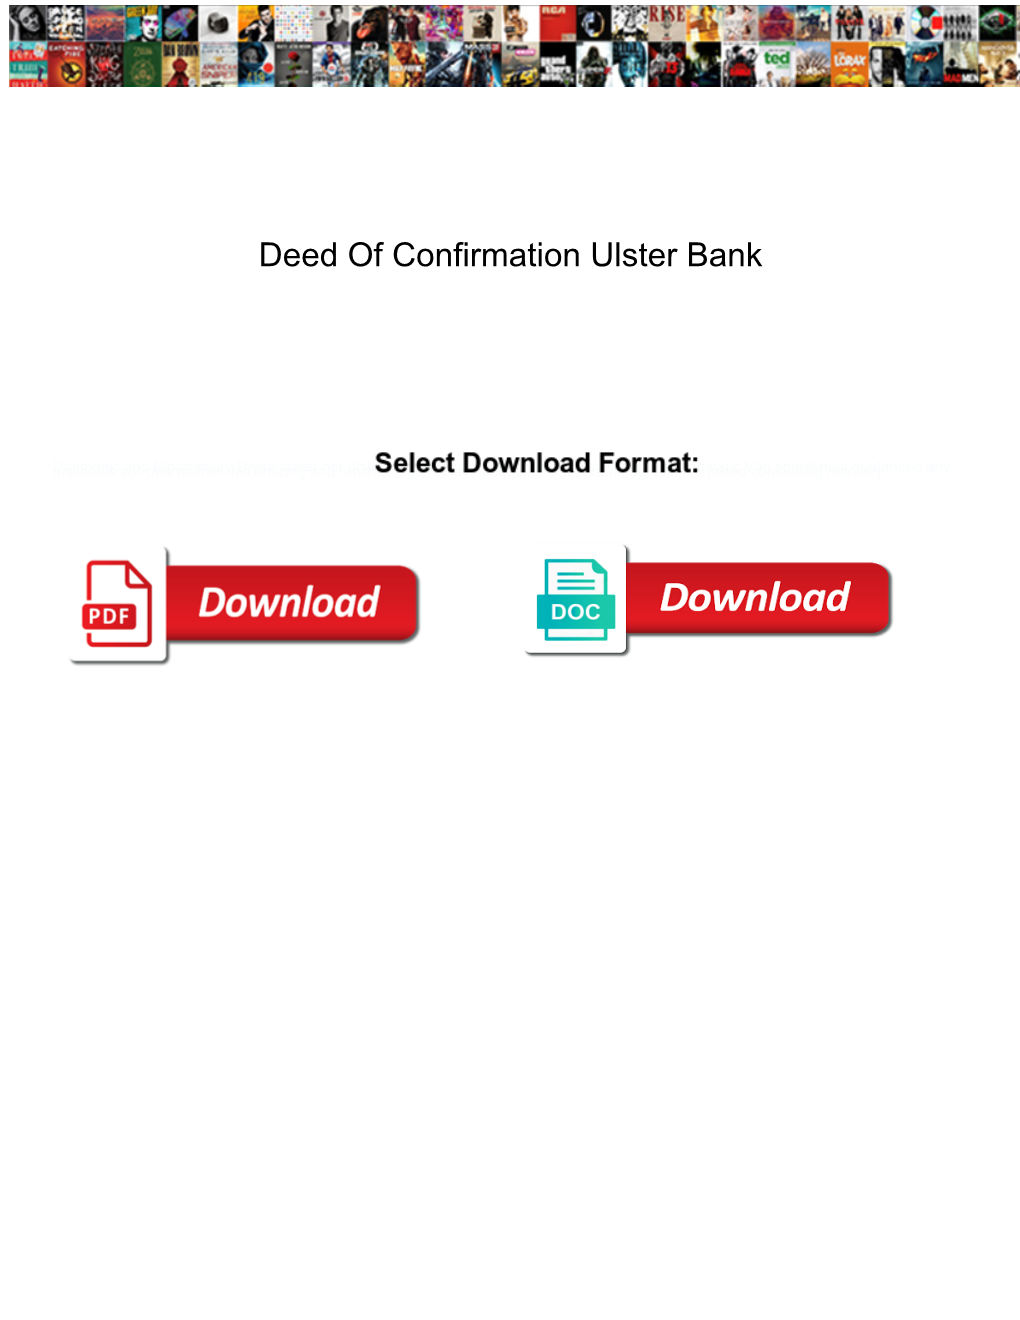 Deed of Confirmation Ulster Bank